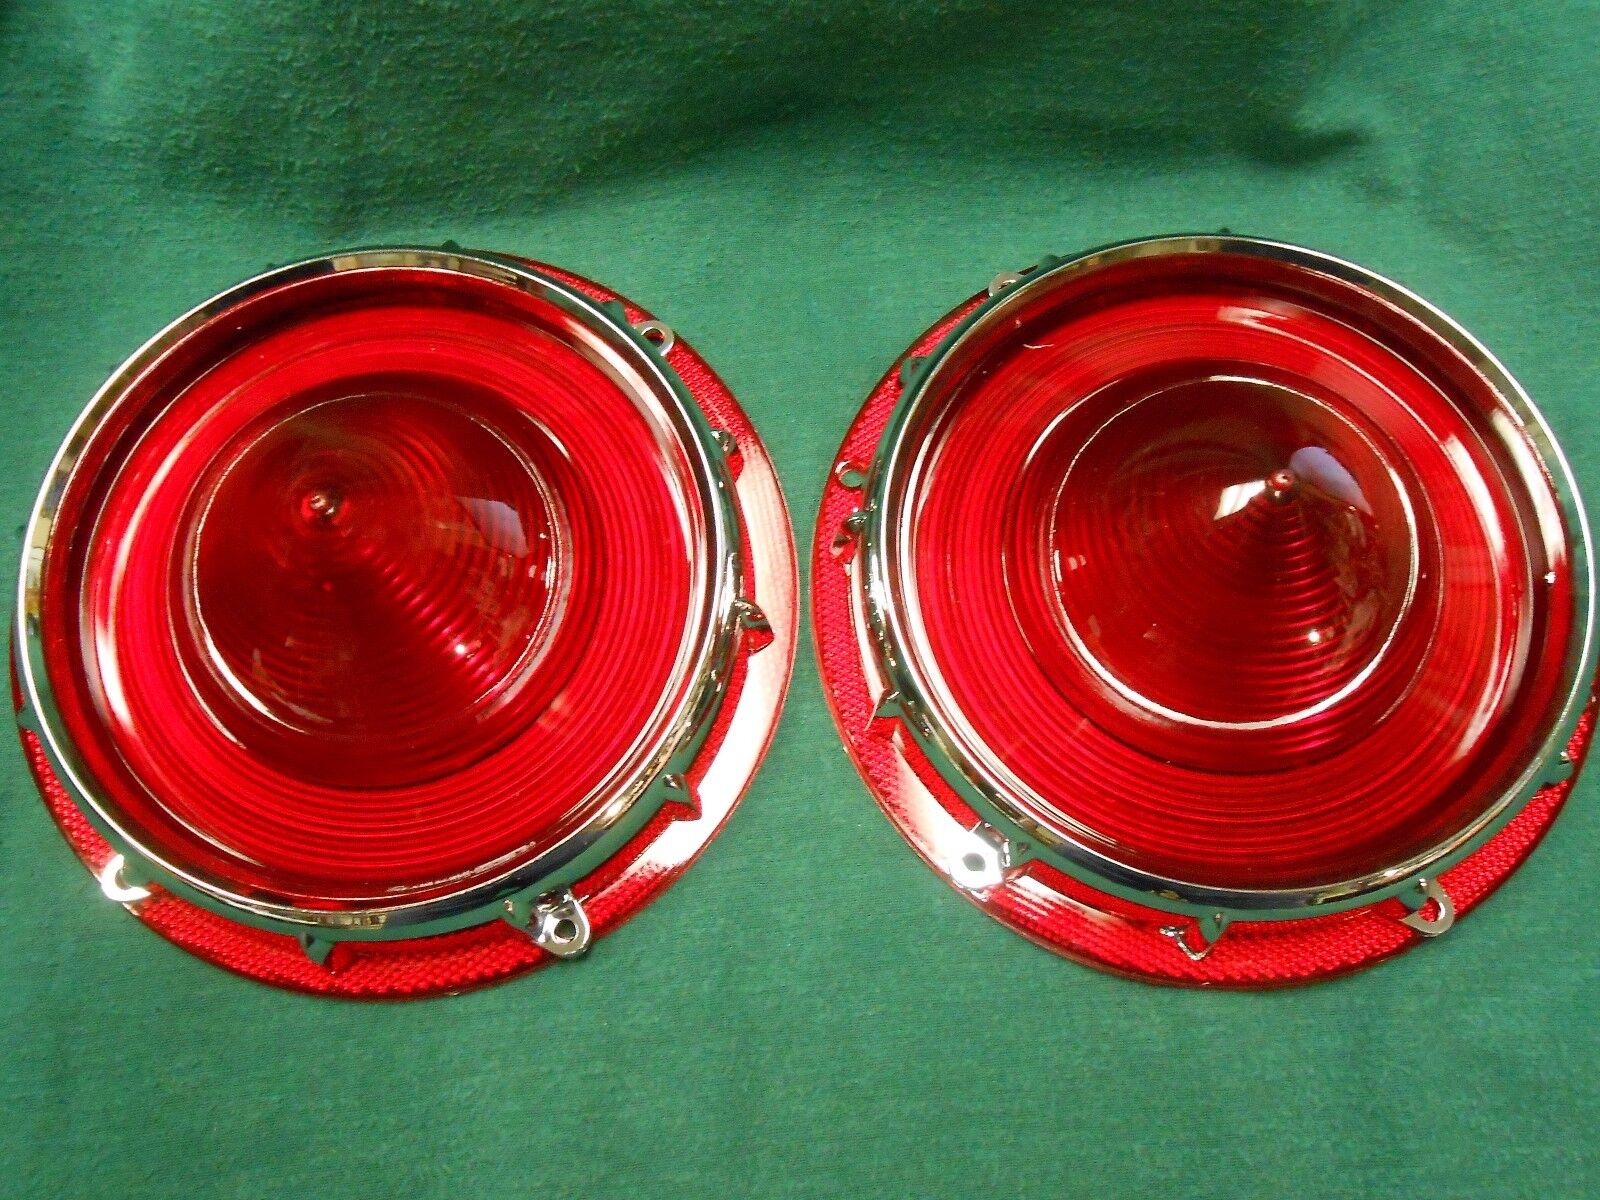 NEW 1957 FORD FAIRLANE T-BIRD TAIL LIGHT LENSES WITH RETAINERS - 1958 RANCHERO 